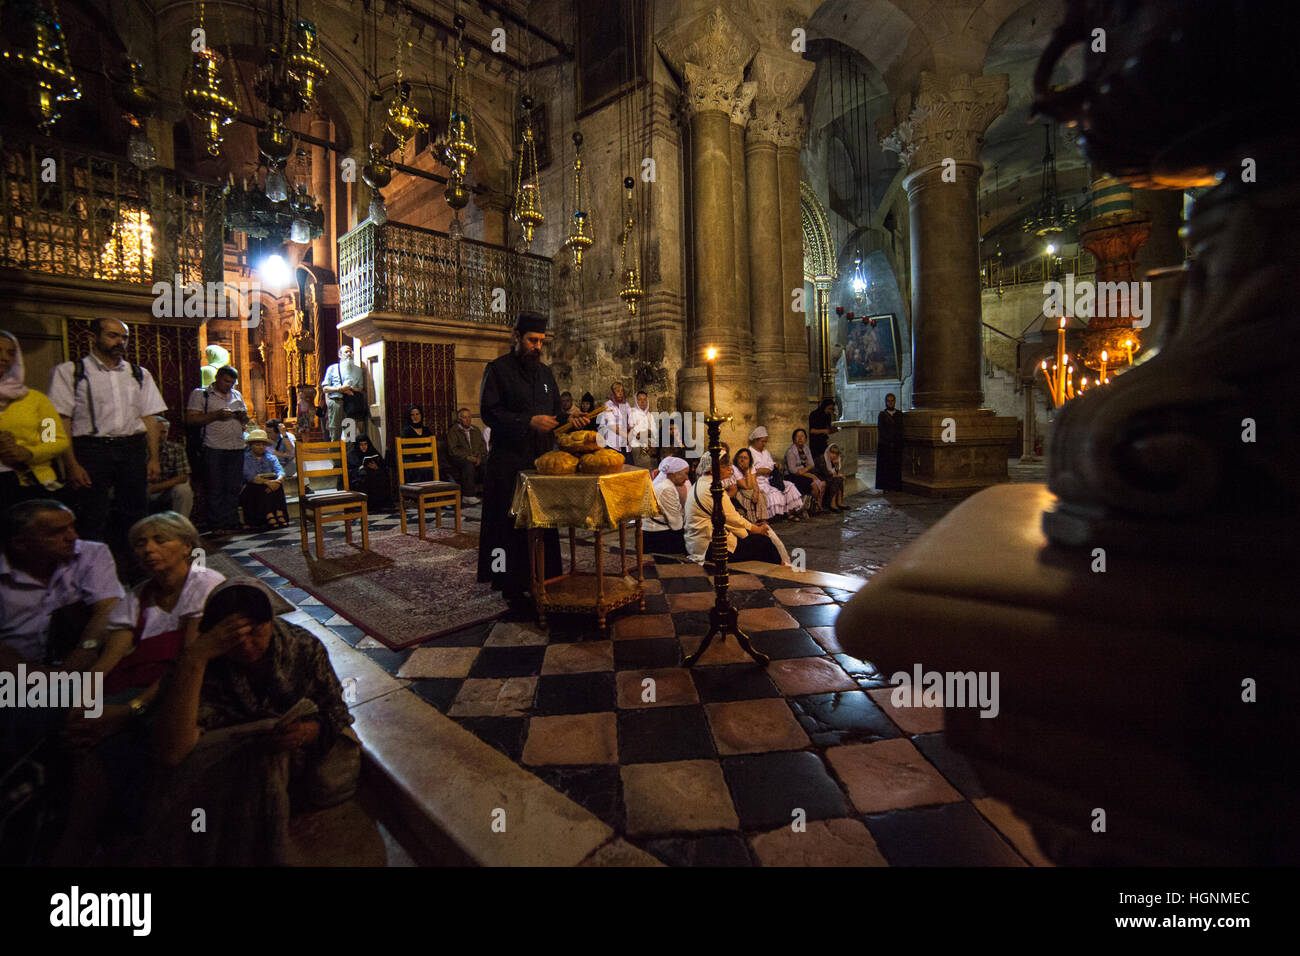 Jerusalem, Israel - July 13, 2014: Greek Orthodox priest holds mass in front of the Aedicula, place believed to be the tomb of Christ. Stock Photo